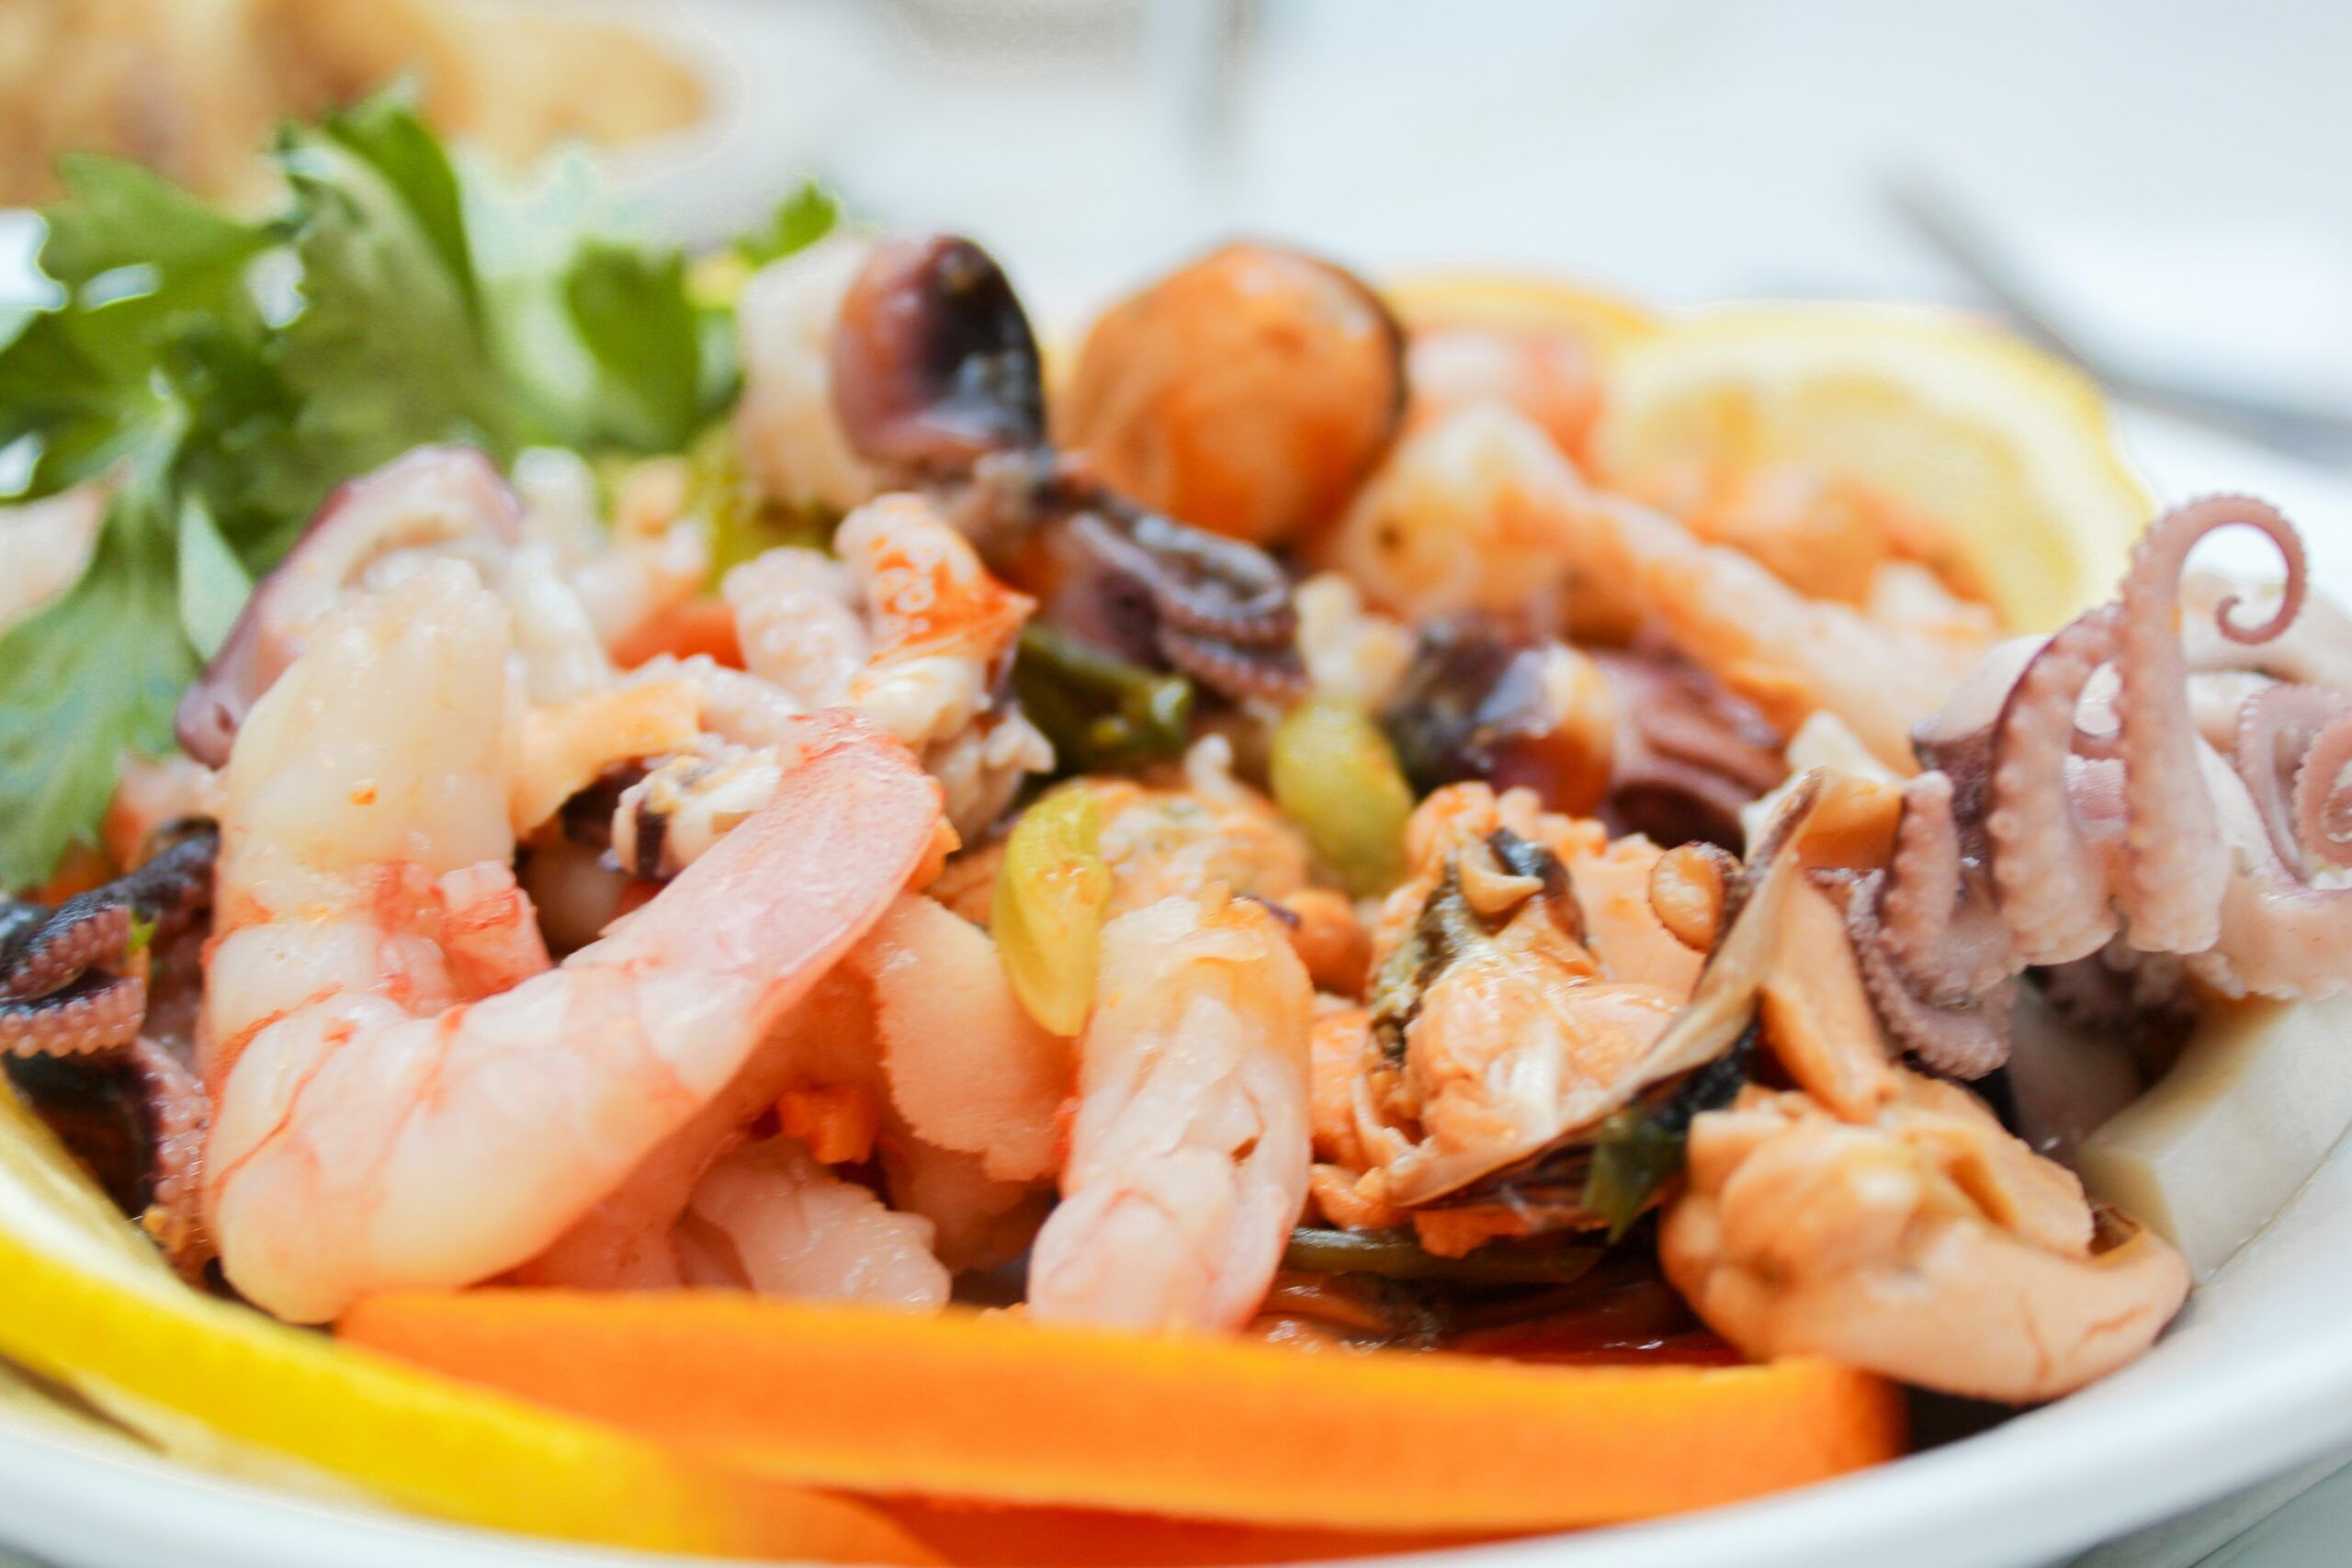 A close up of seafood salad with prawns, squid and muscles with citrus fruit and salad leaves